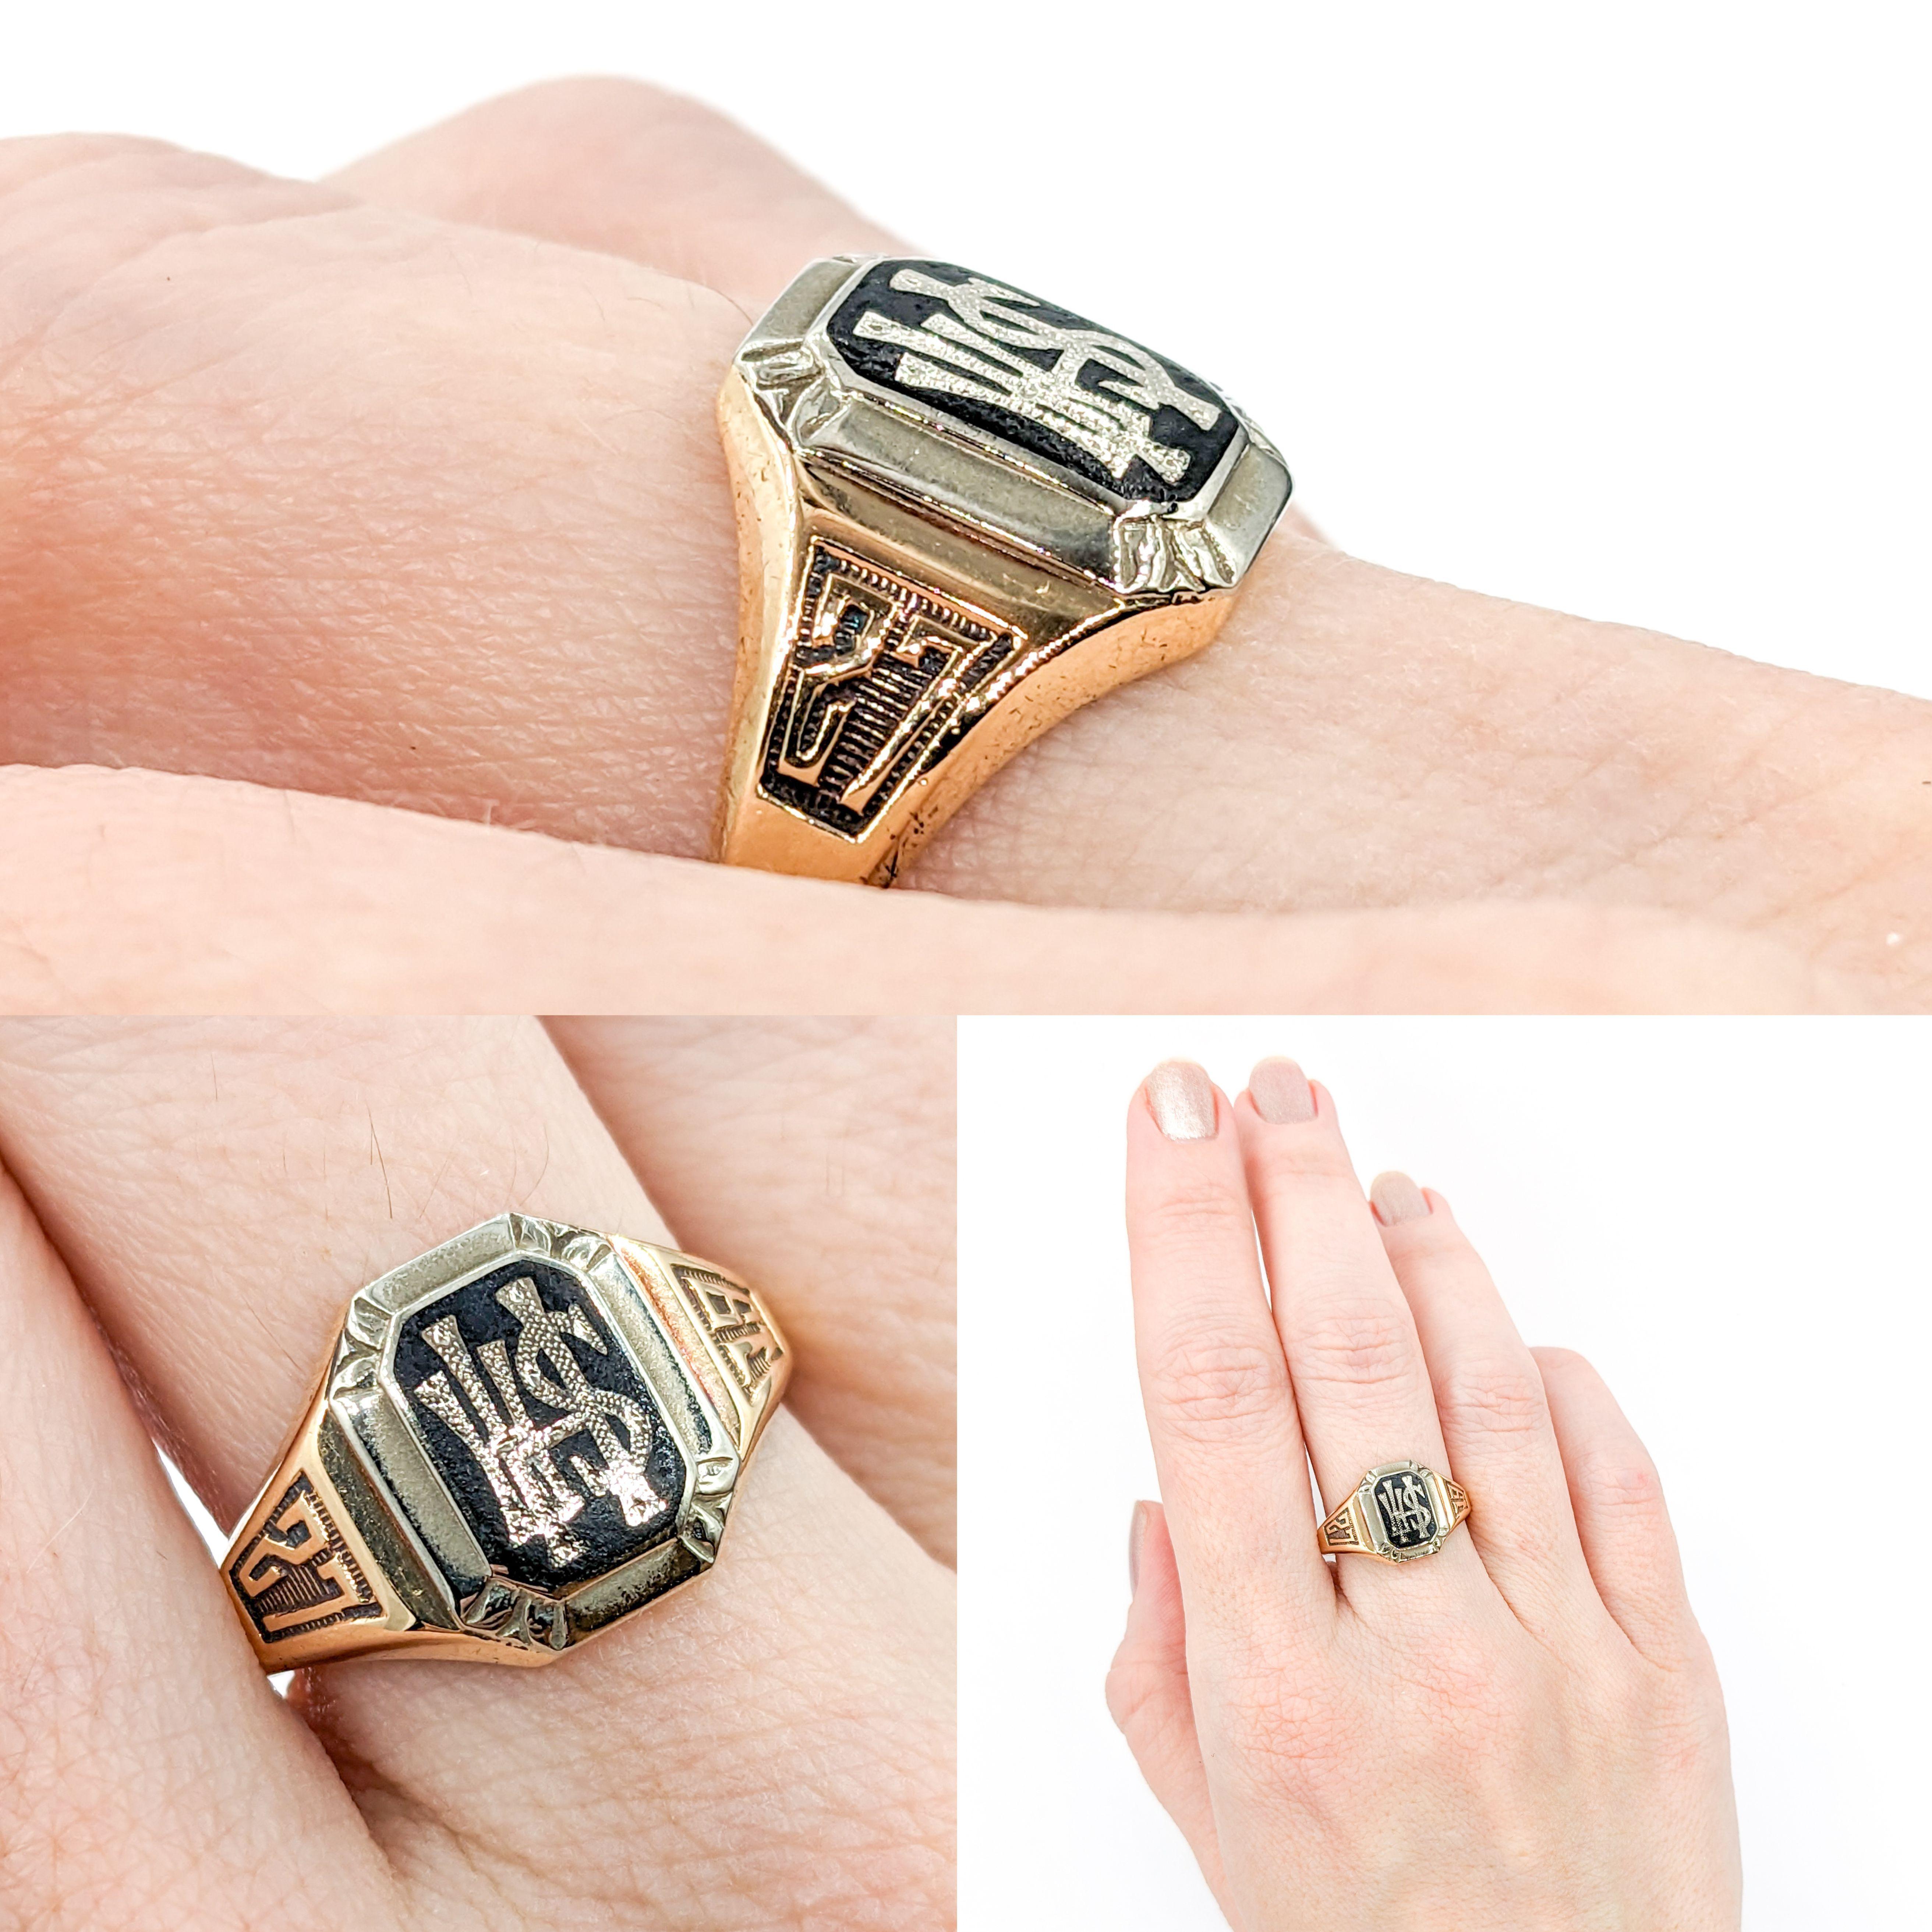 Antique 1927 Class Ring in Yellow Gold 

Introducing a beautiful Vintage Class Ring from 1927 Slayton, MN, meticulously crafted in 10kt Yellow Gold. The Ring features a captivating design and enamel that have stood the test of time. This Ring is